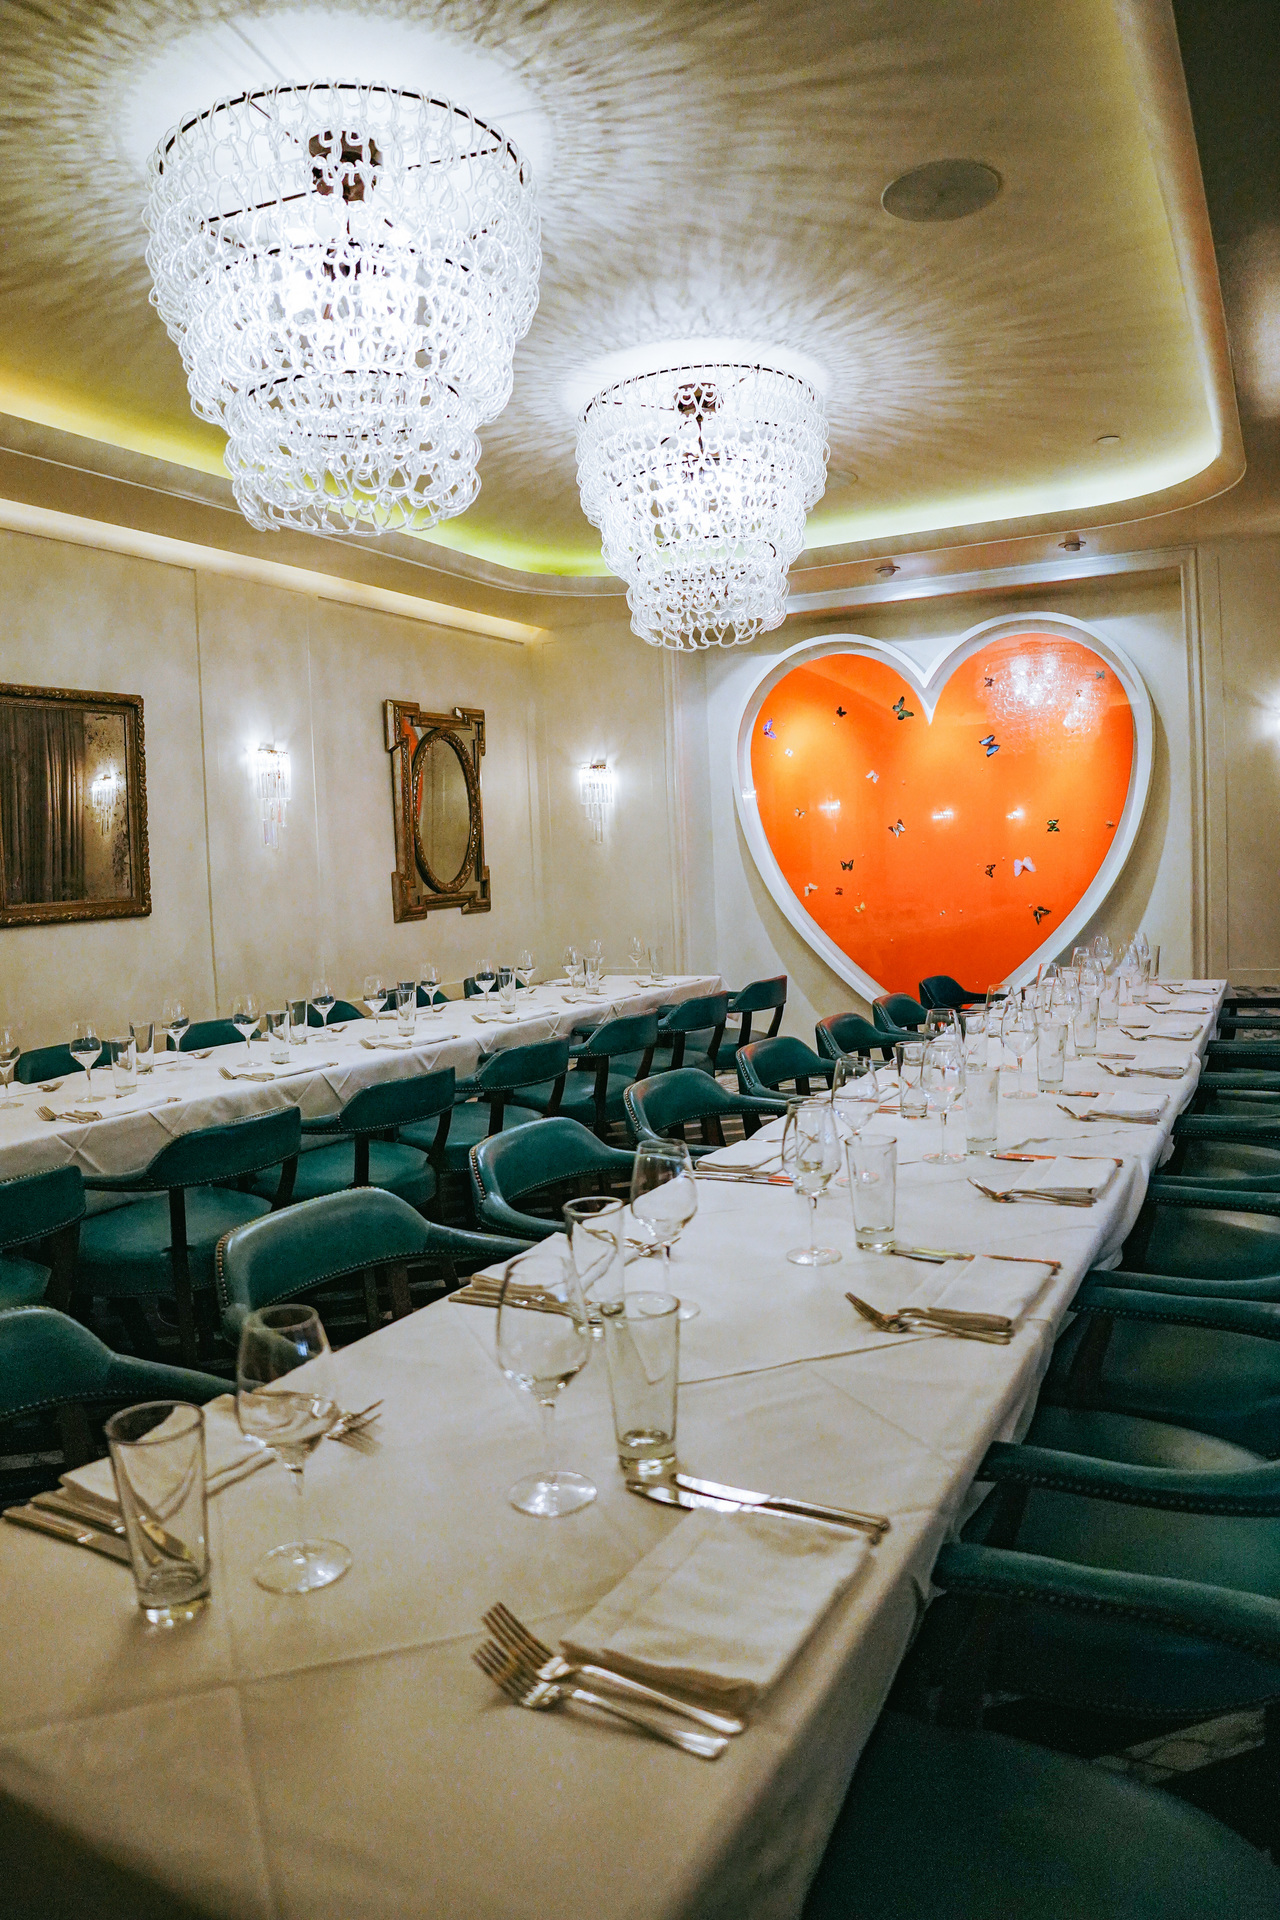 Two long dining tables with a giant painting of a heart